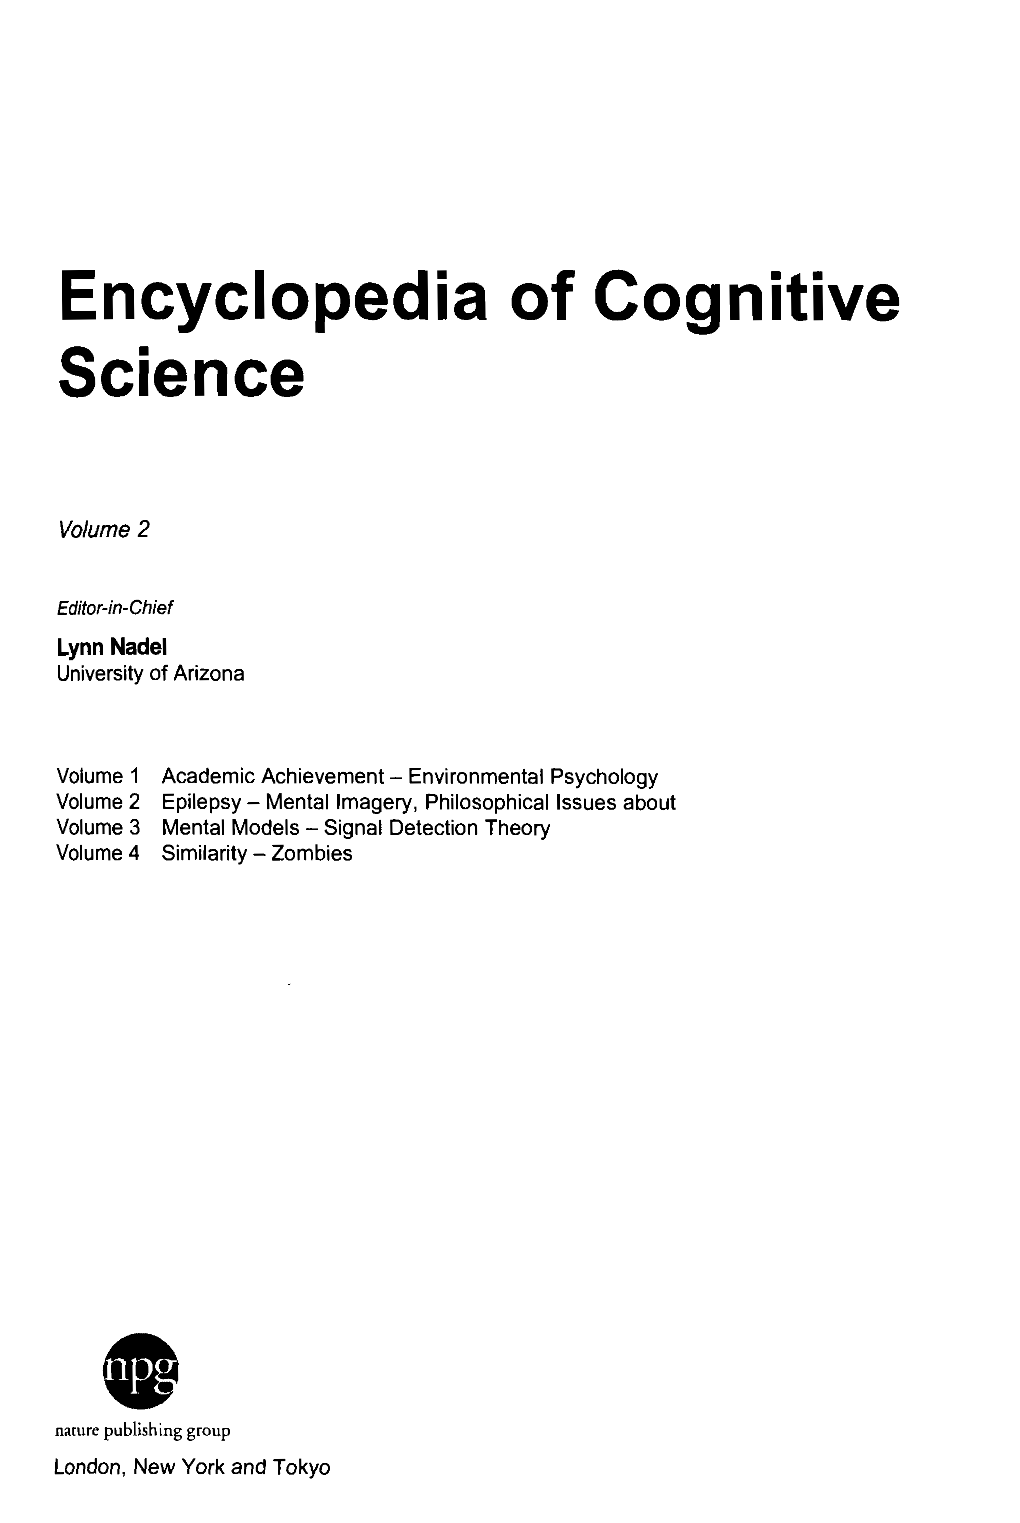 Encyclopedia of Cognitive Science